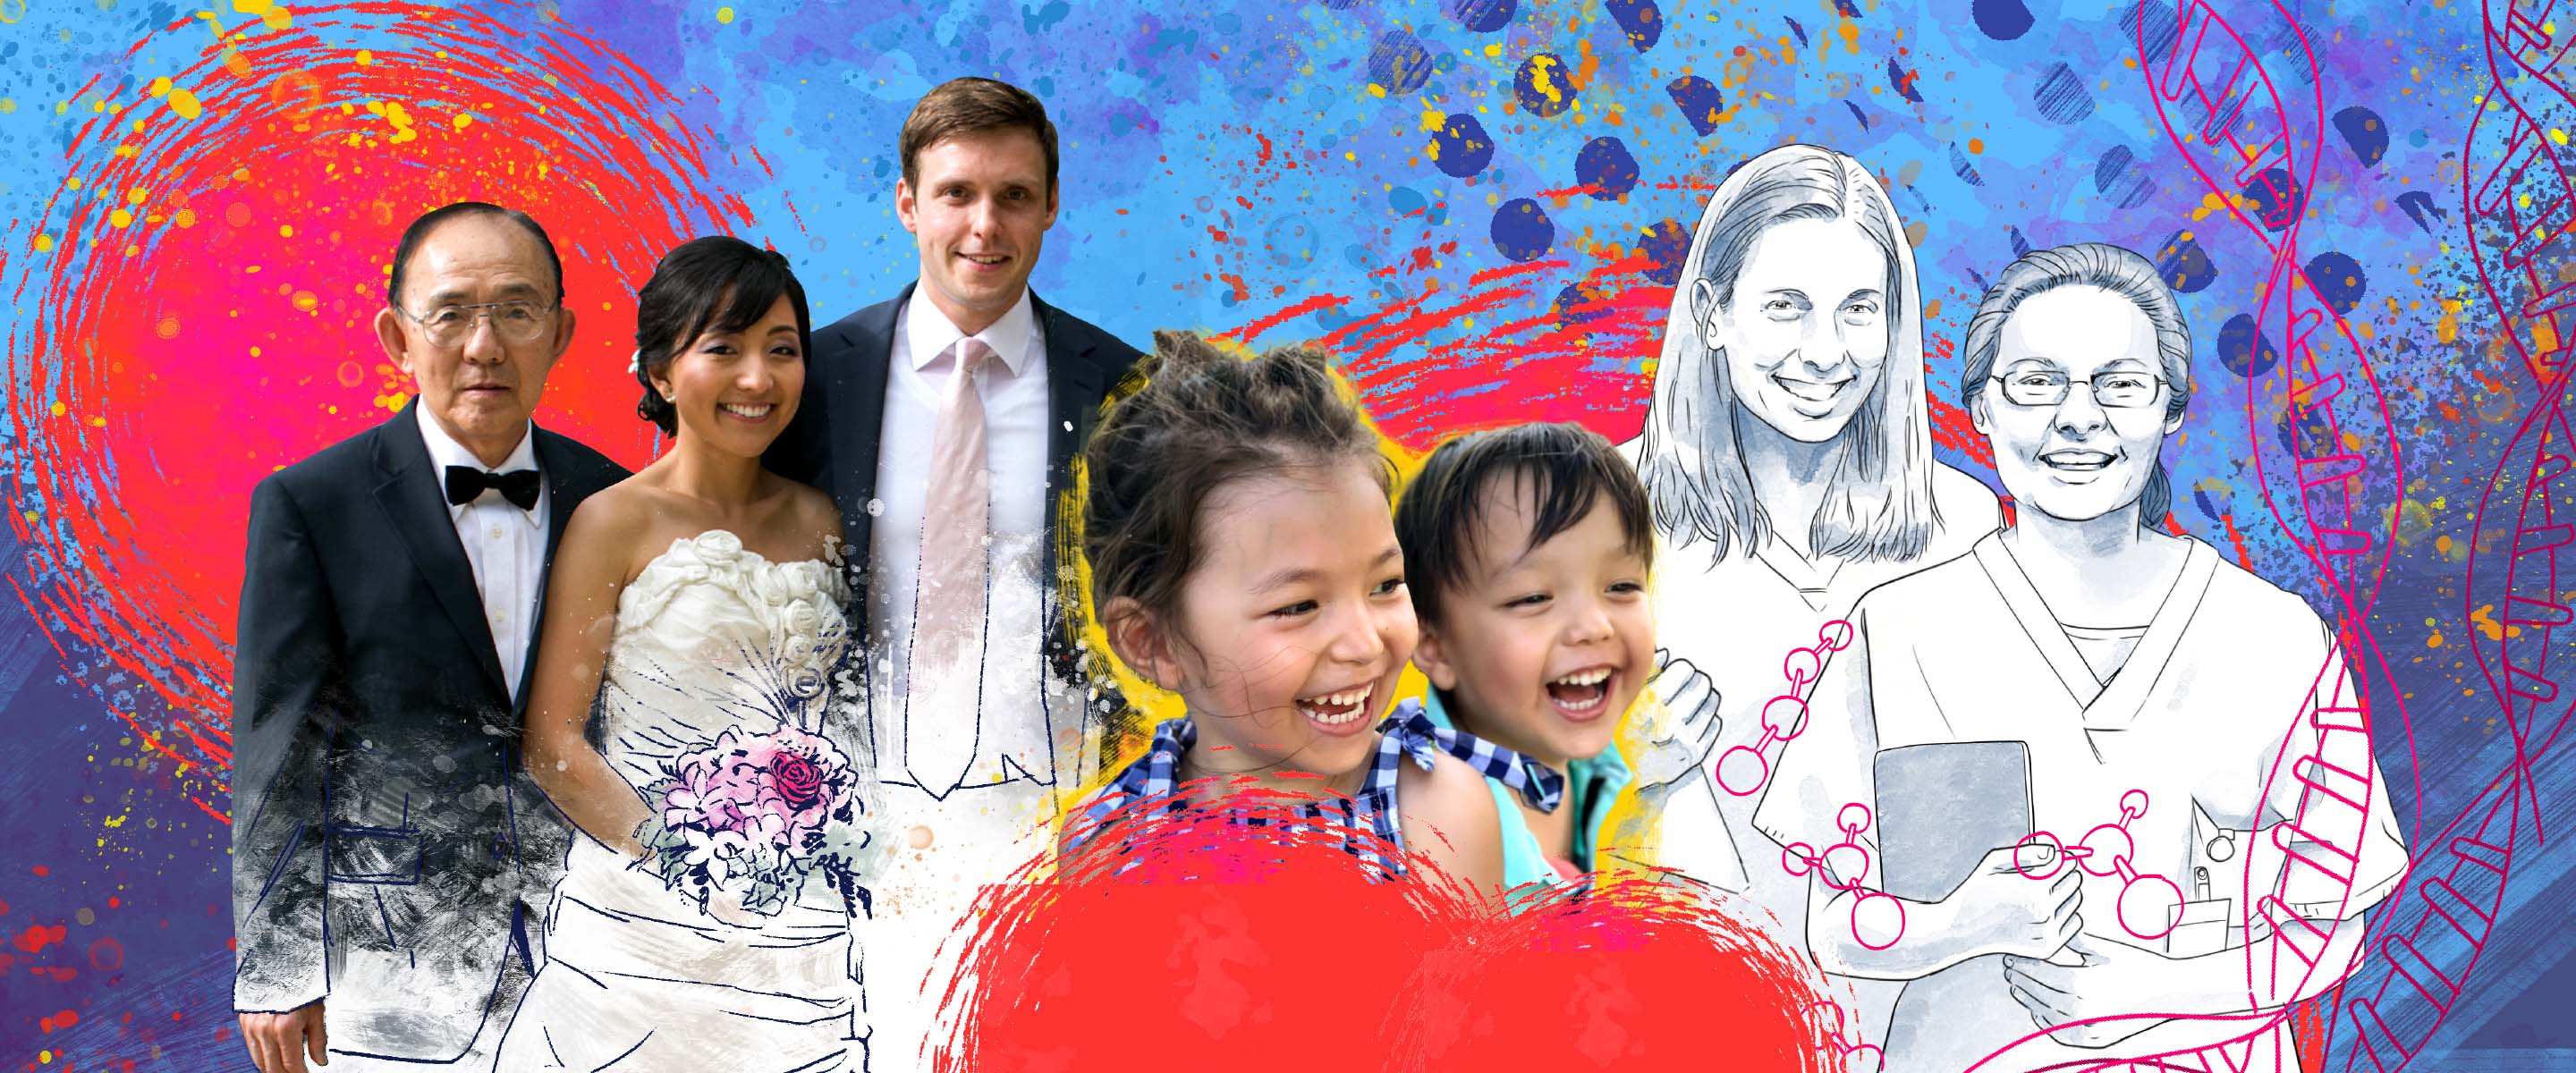 A colorful collage of a couple getting married, a man in a suit, laughing kids, and two woman scientists.